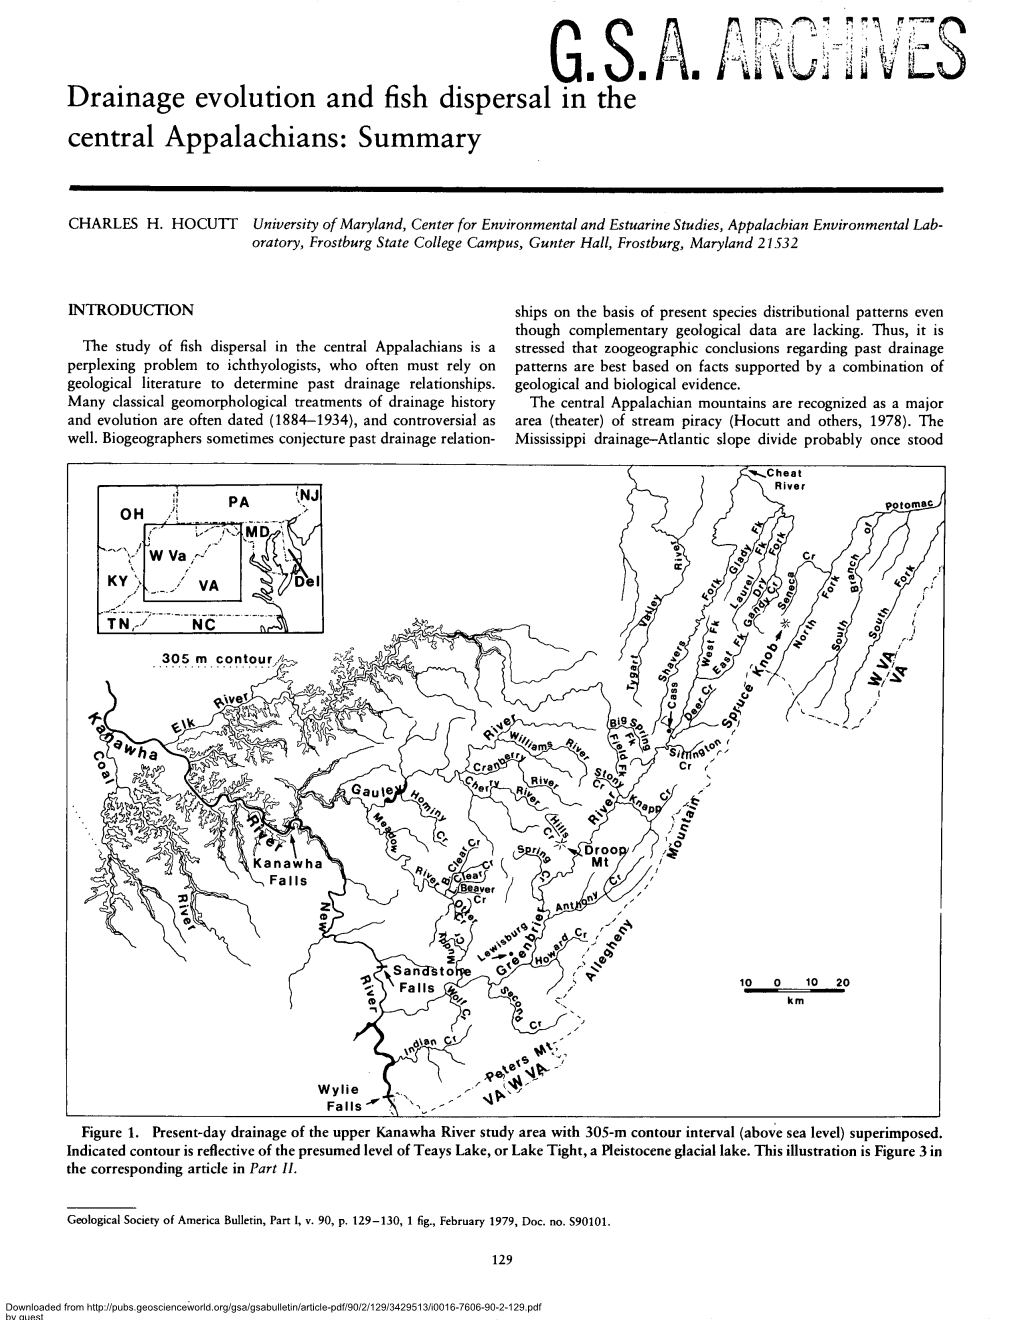 Drainage Evolution and Fish Dispersal in the Central Appalachians: Summary